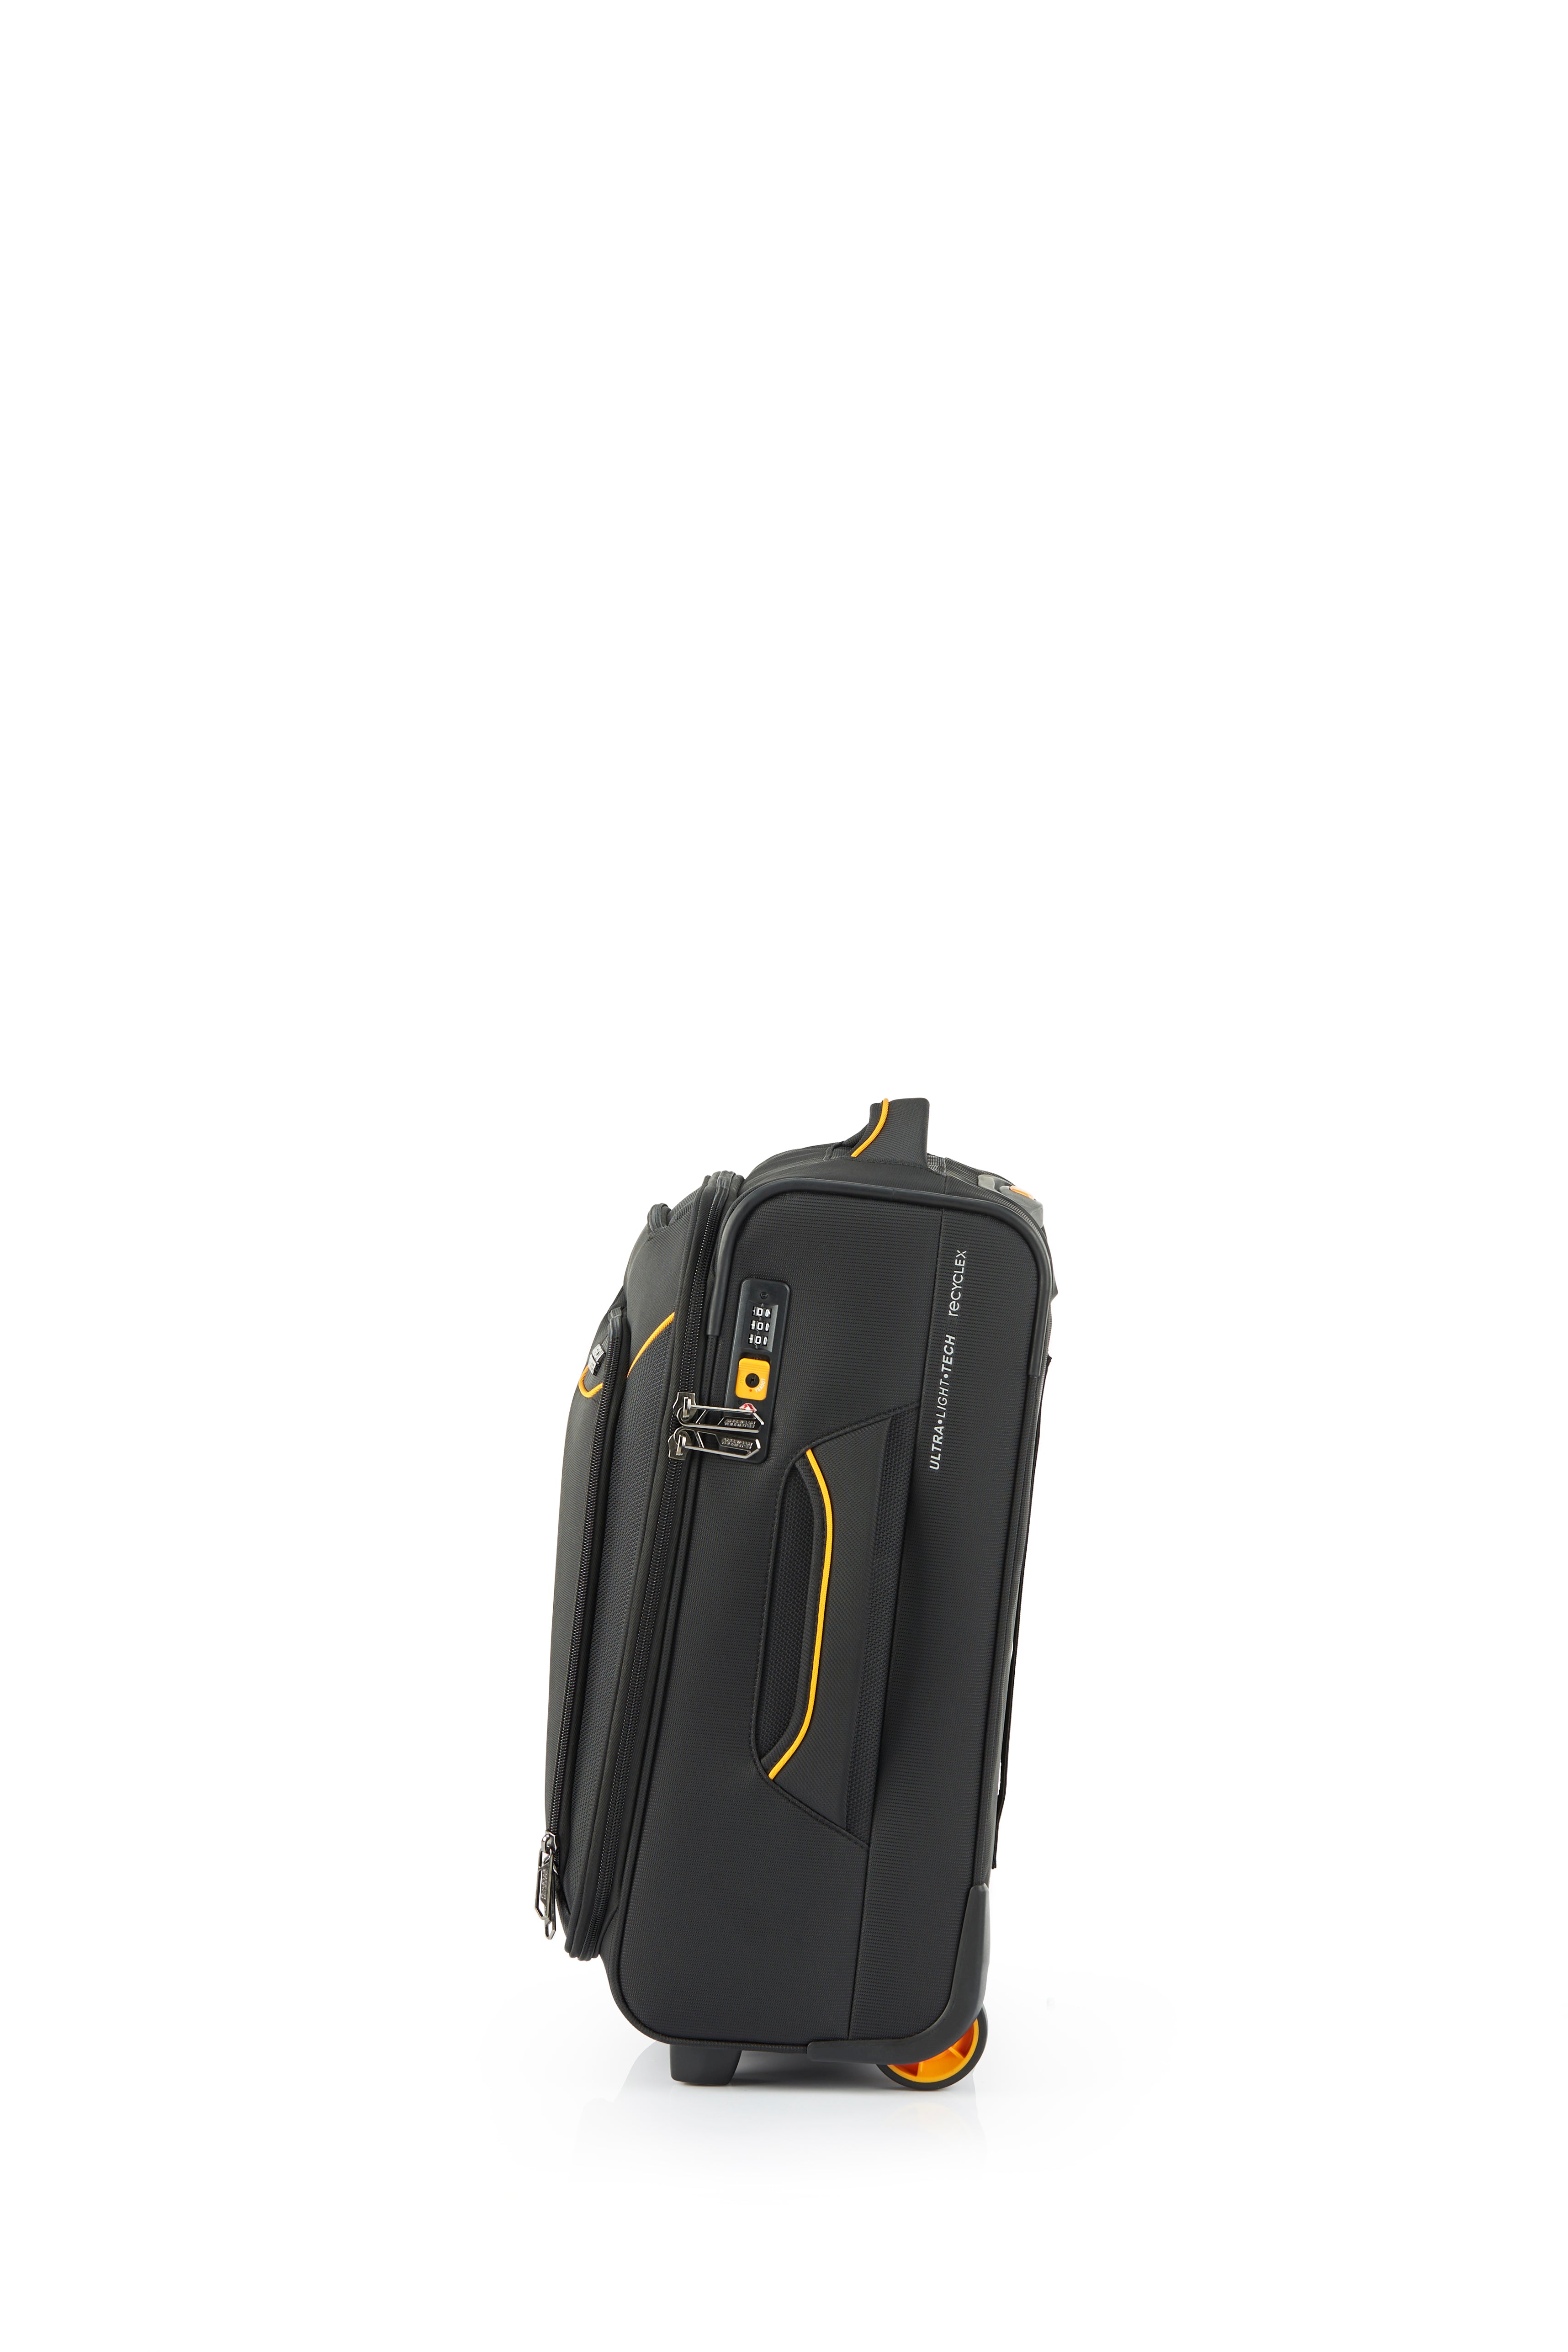 American Tourister - Applite ECO 50cm Small Suitcase - Black/Must-4